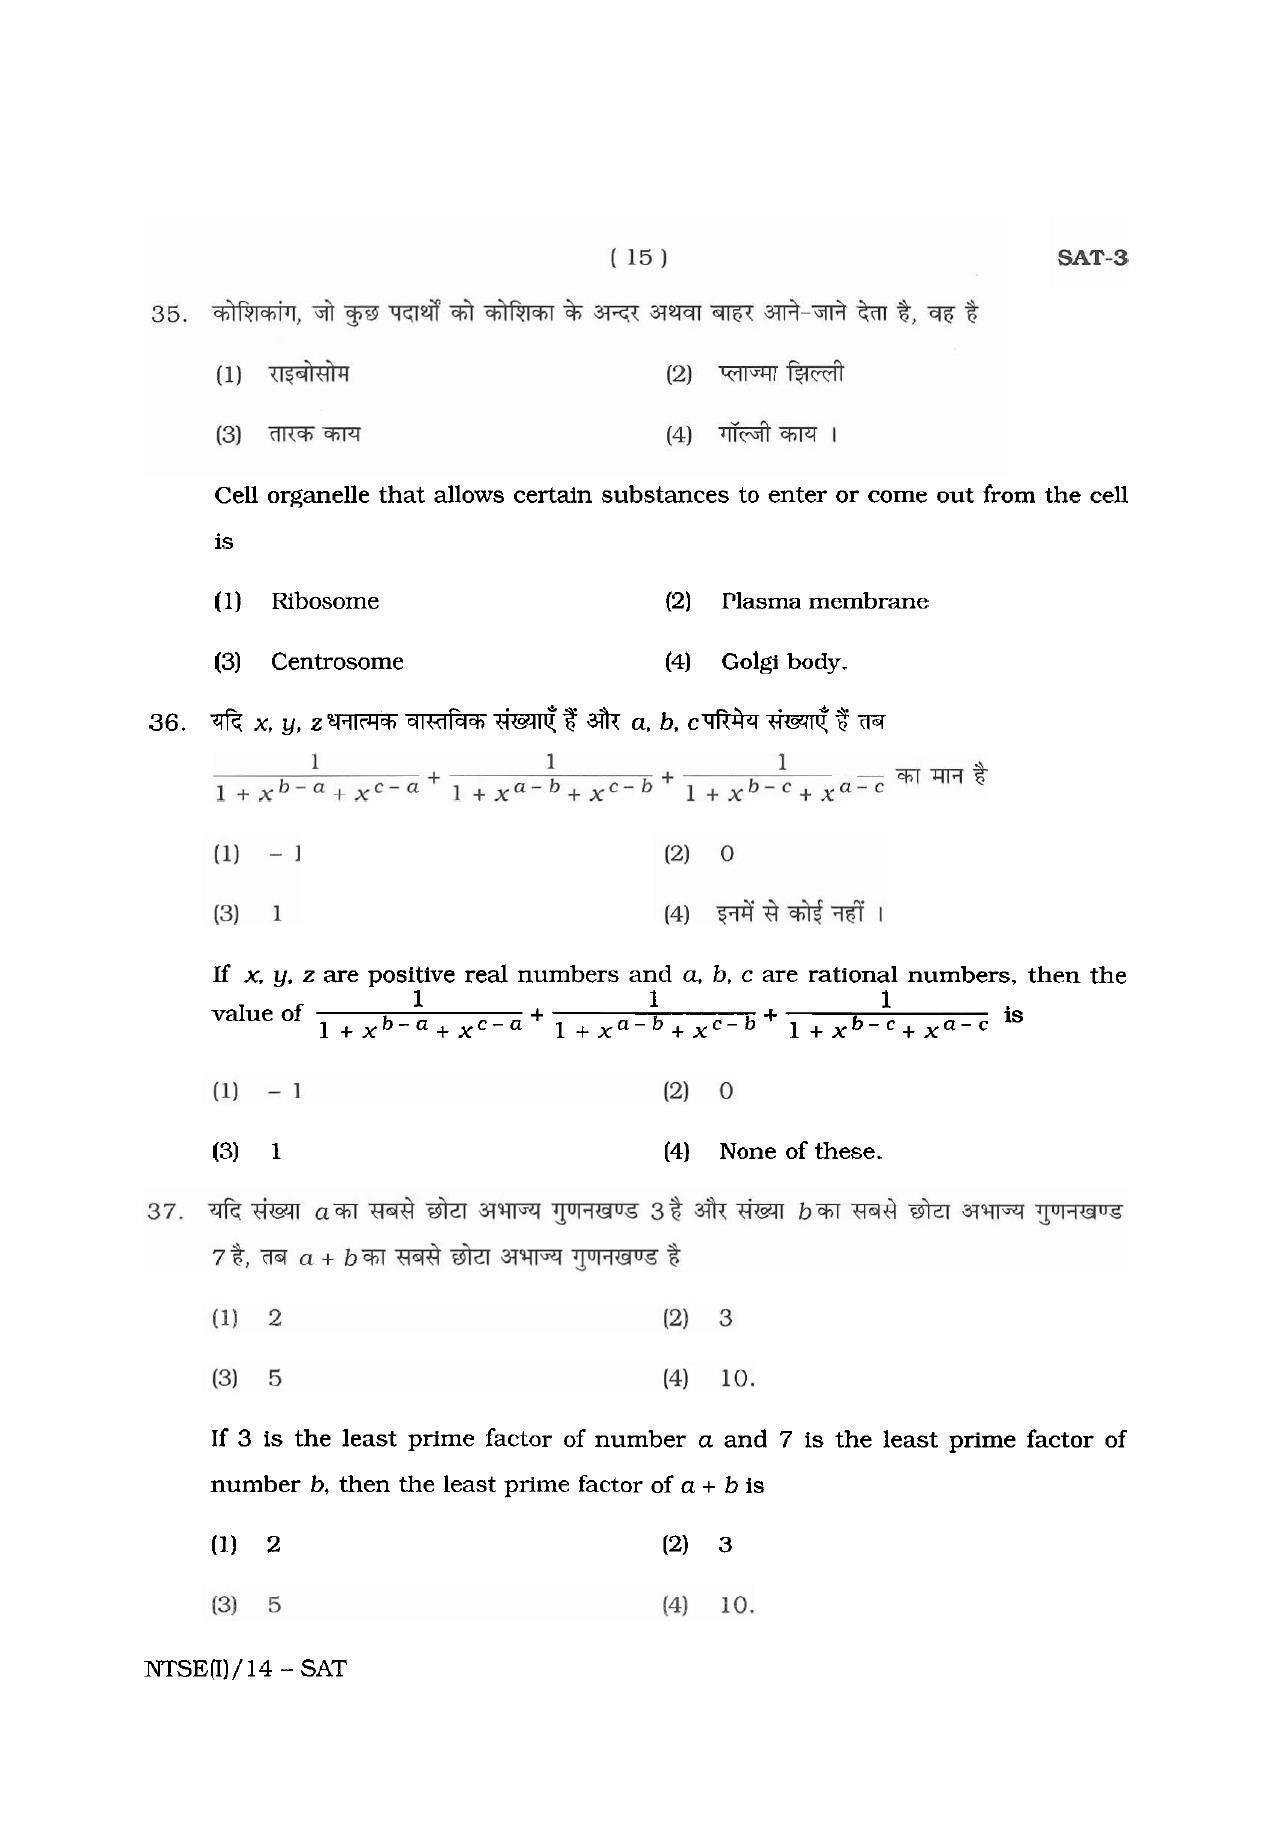 NTSE 2014 (Stage II) SAT Question Paper - Page 15